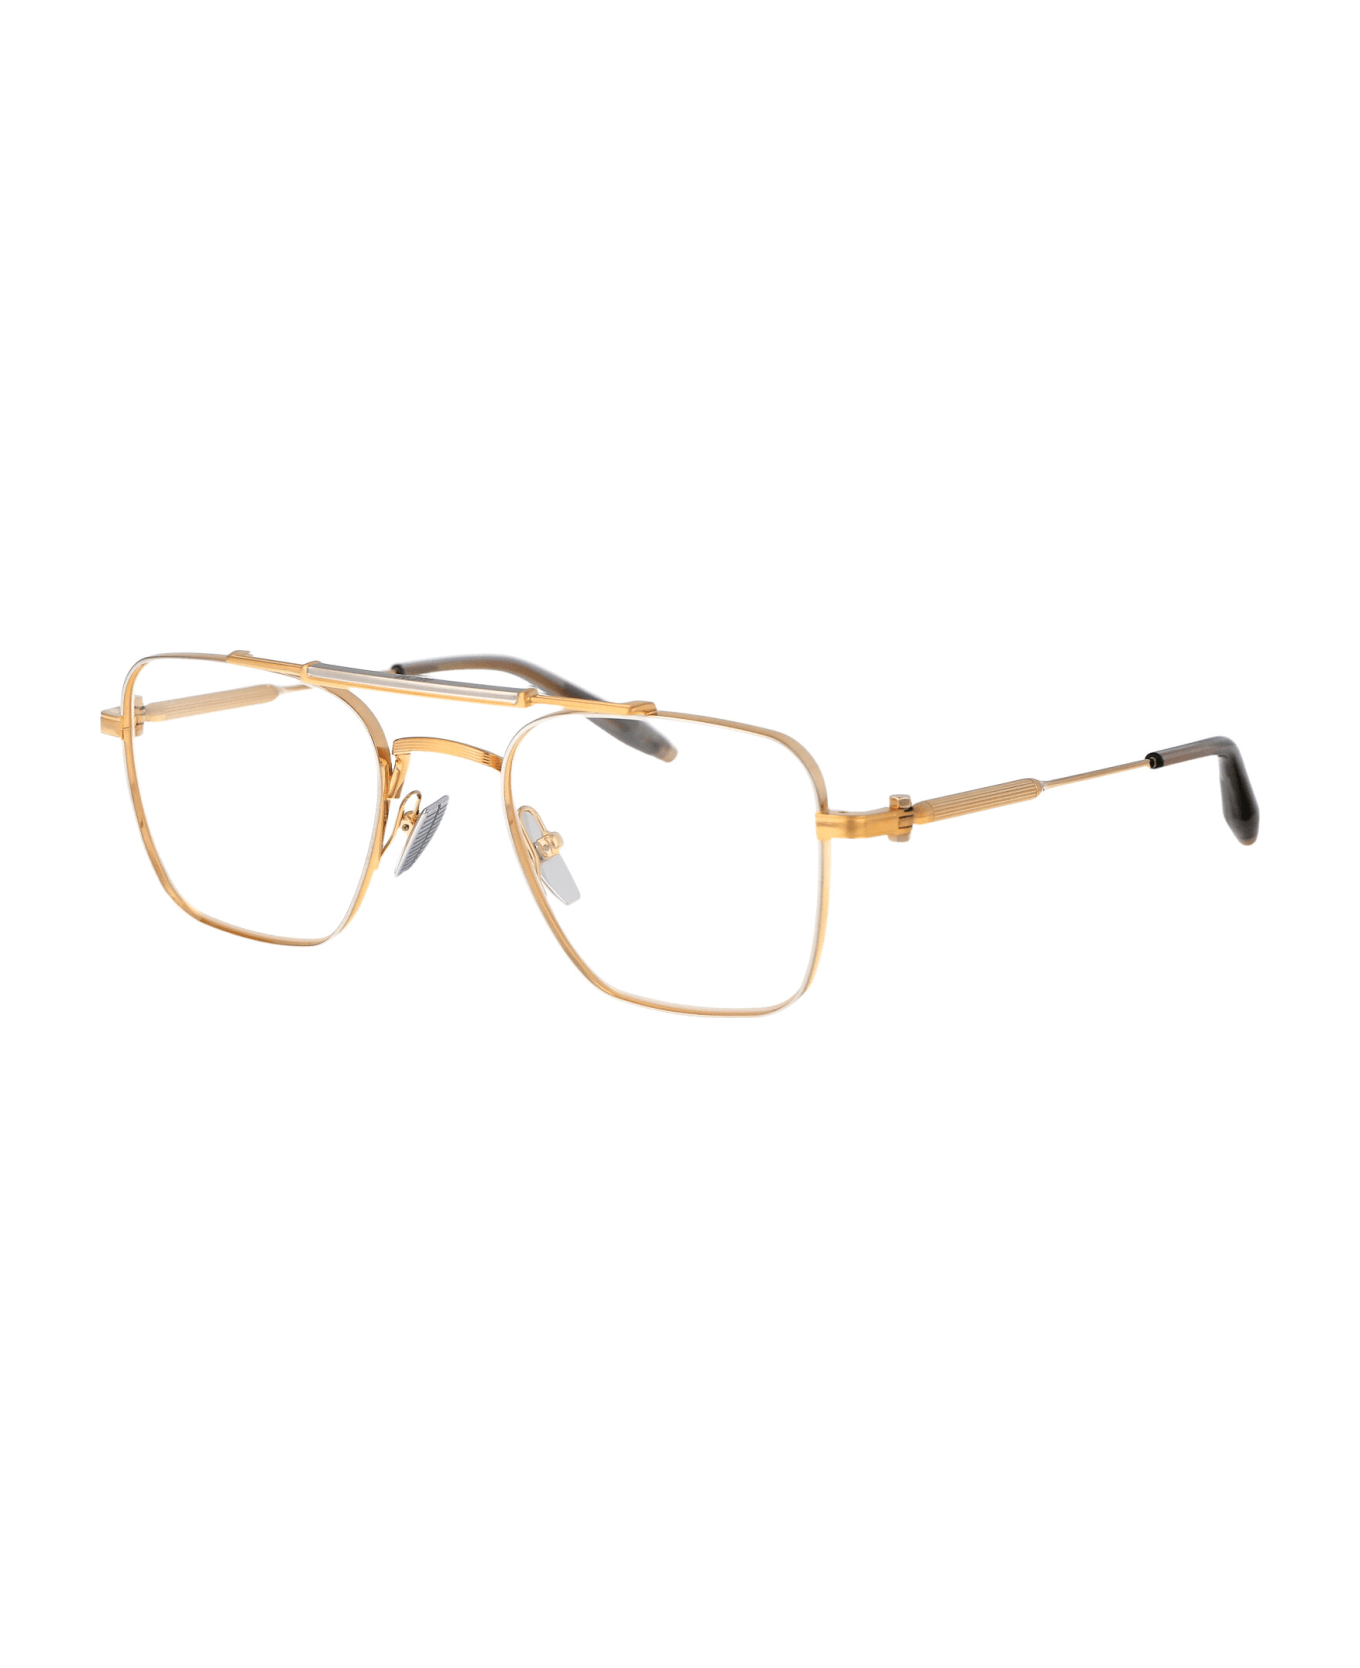 Akoni Europa Glasses - Brushed gold and Silver- Grey Crystal アイウェア